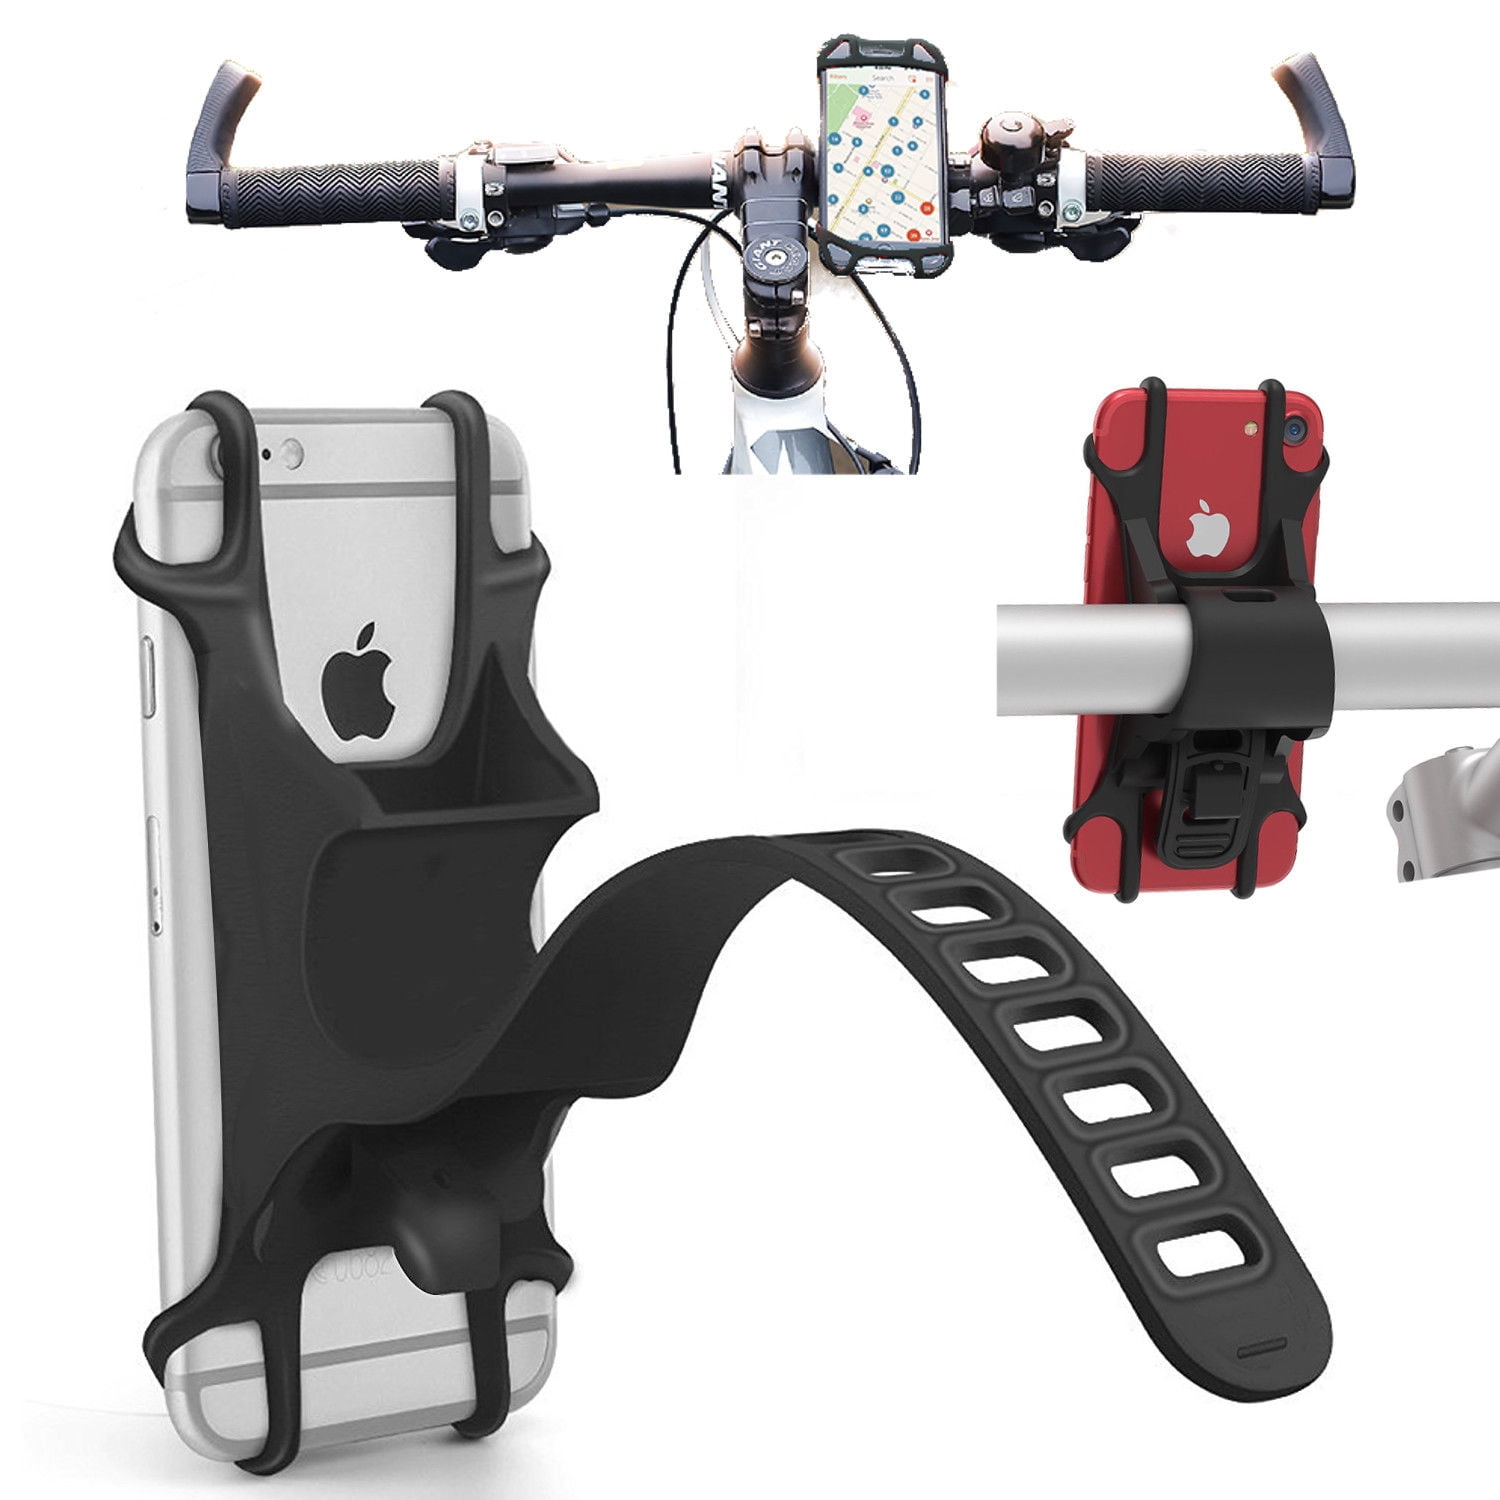 for iPhone X XS MAX XR 8 7 6 Plus Phone Holder for Bicycle/Motorcycle Universal Cell Phone Cradle Clamp Handlebar Rack Bike Phone Mount Samsung S9 S8 S7 S6 S5 Edge Note LG 